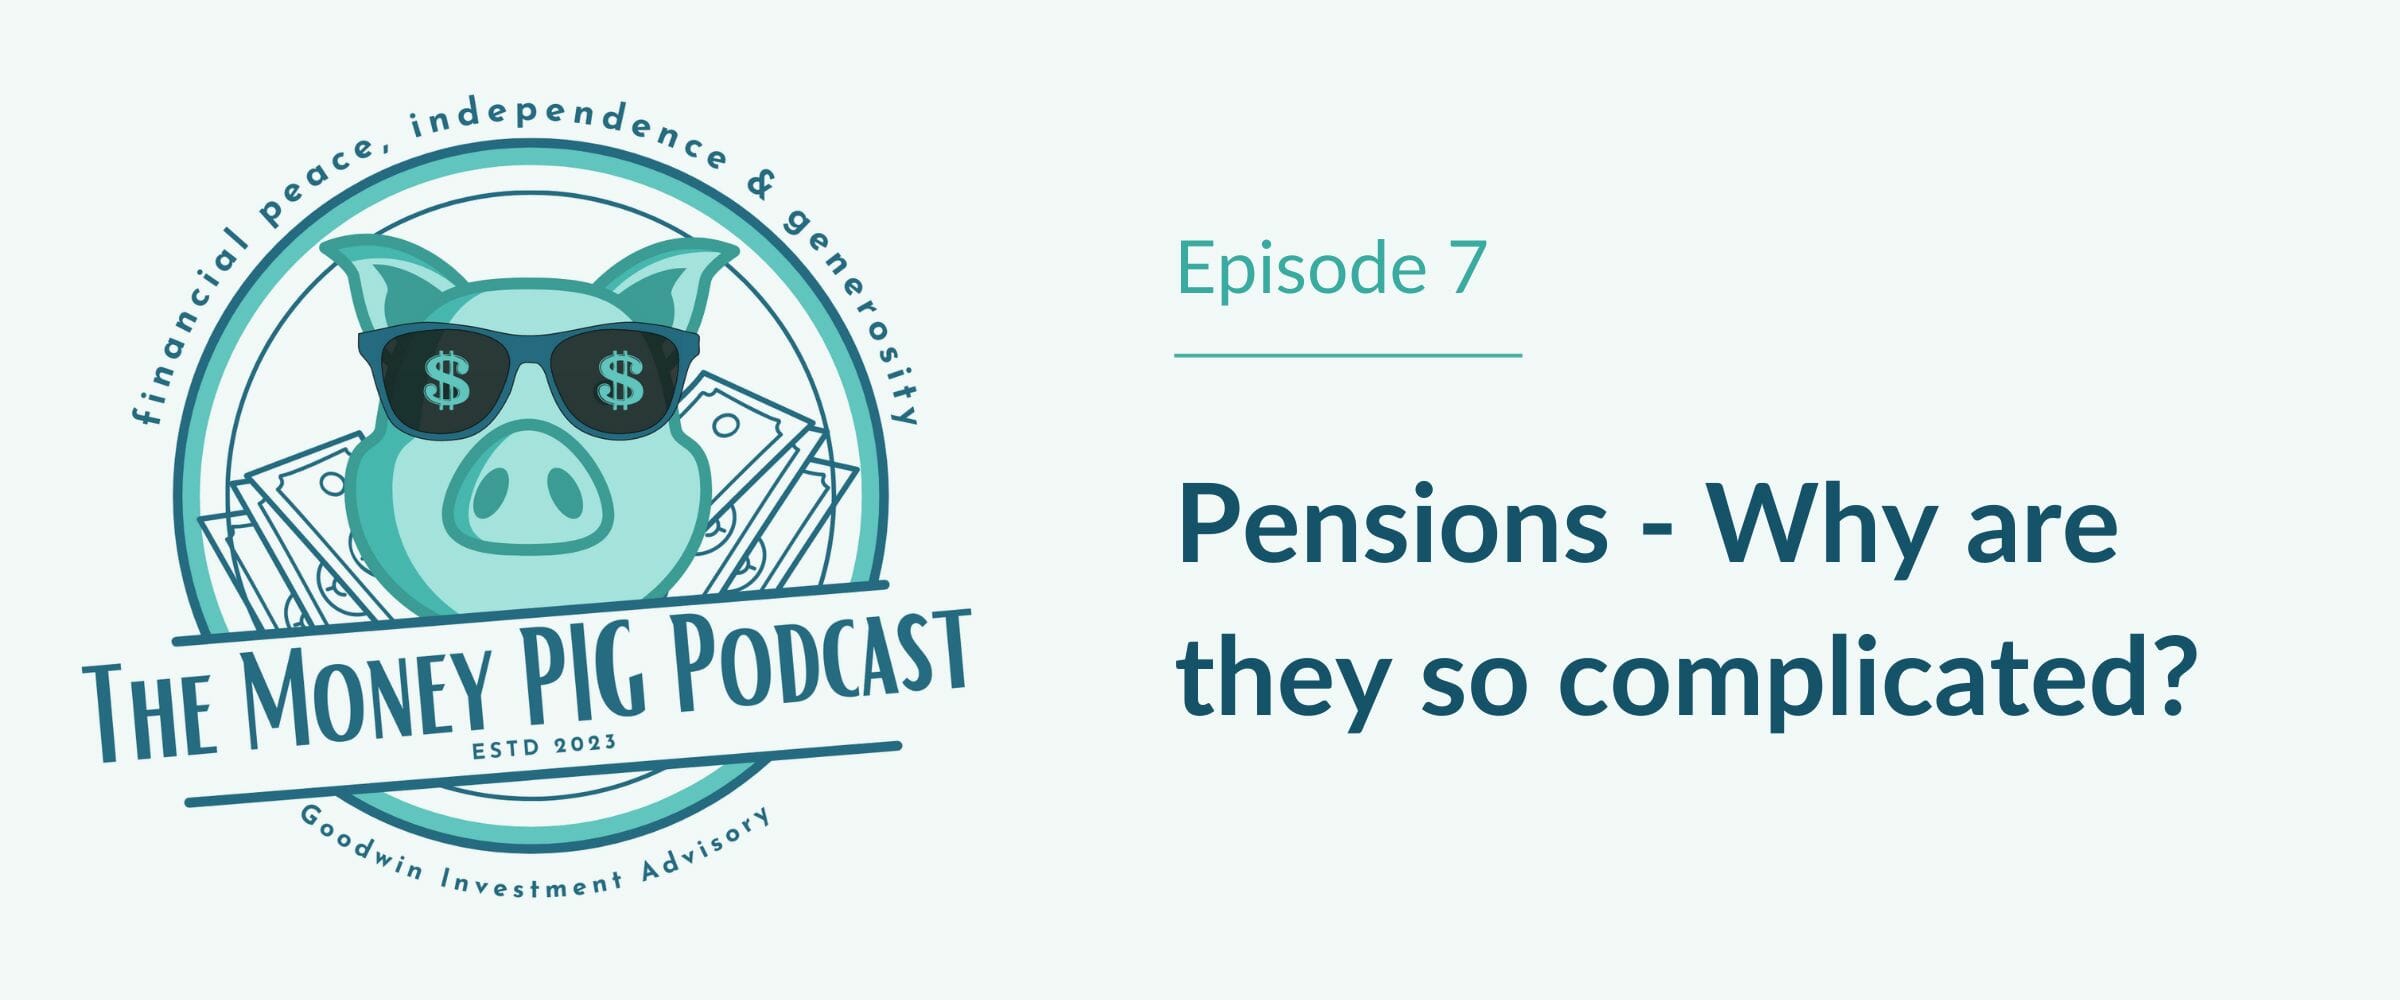 Pensions – Why are they so complicated?